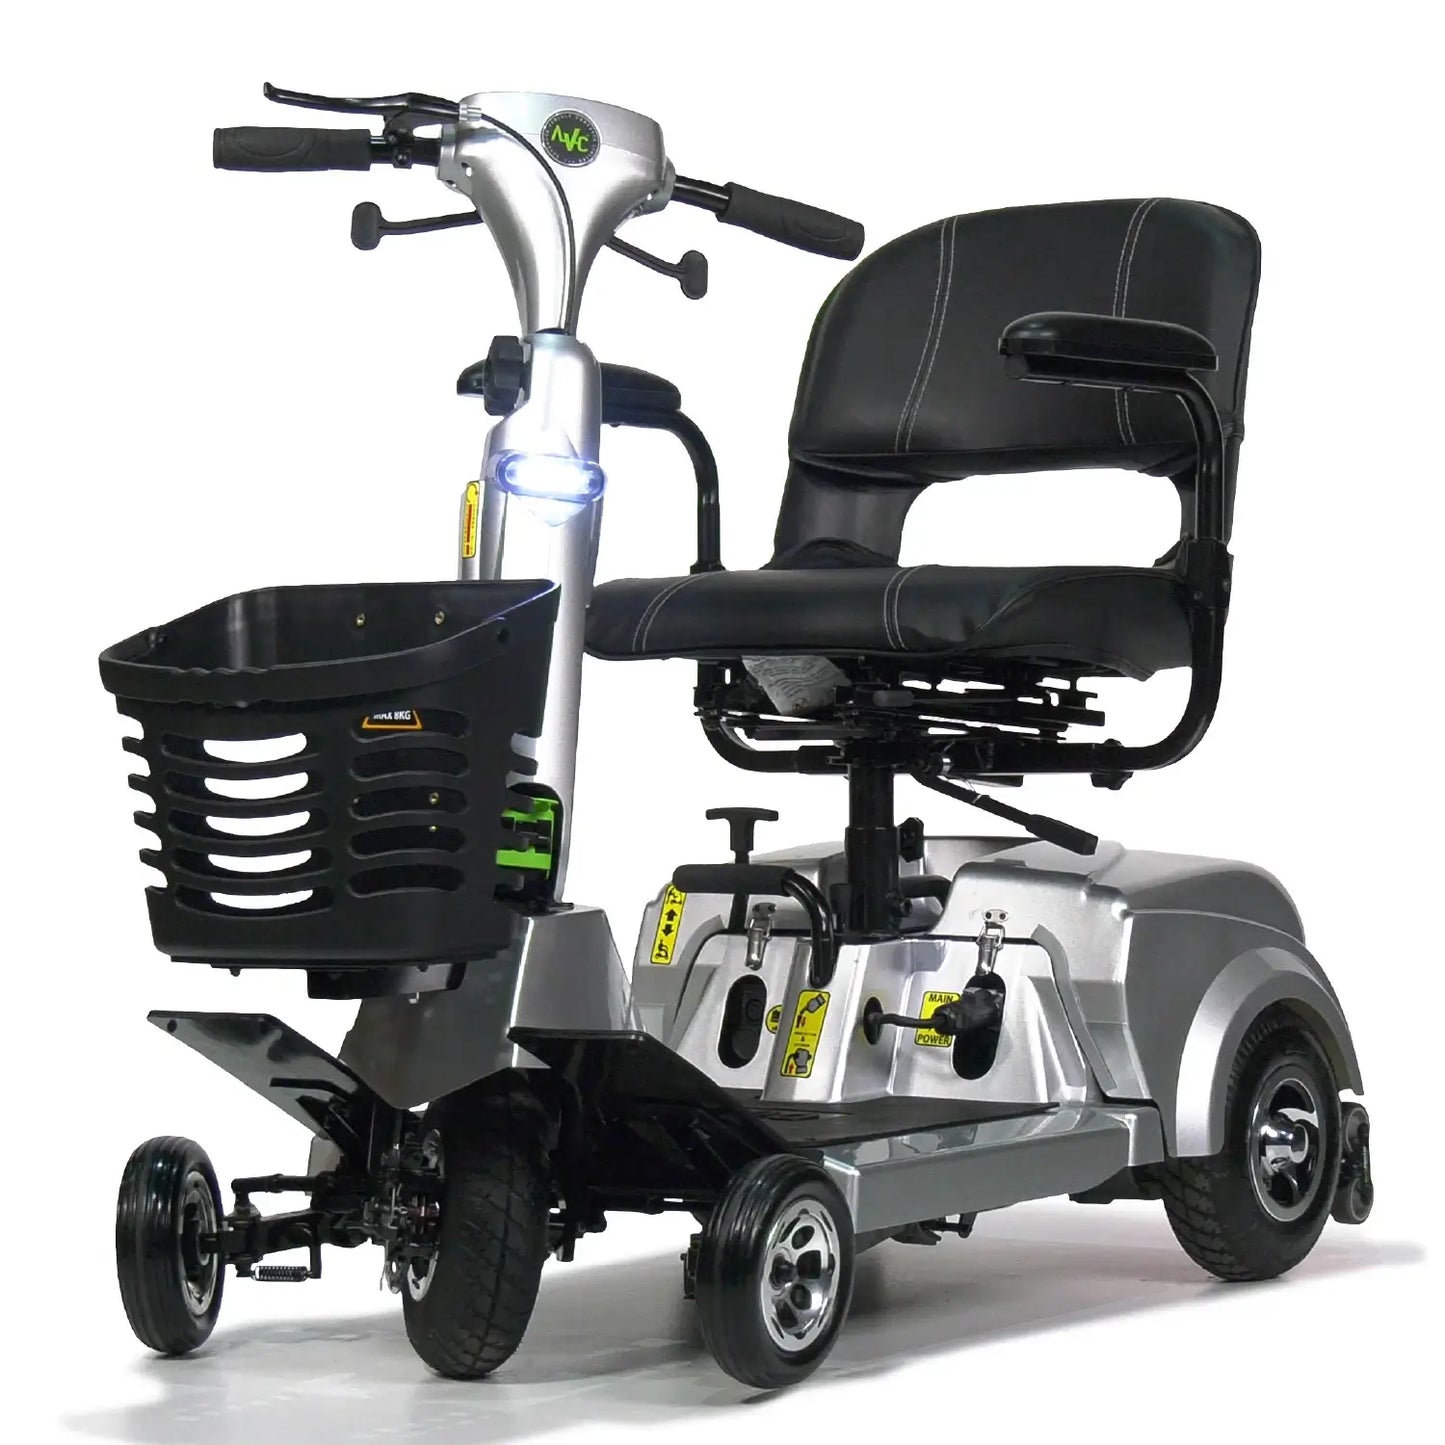 Quingo Ultra Mobility Scooter with Safer curb handling – even at angles